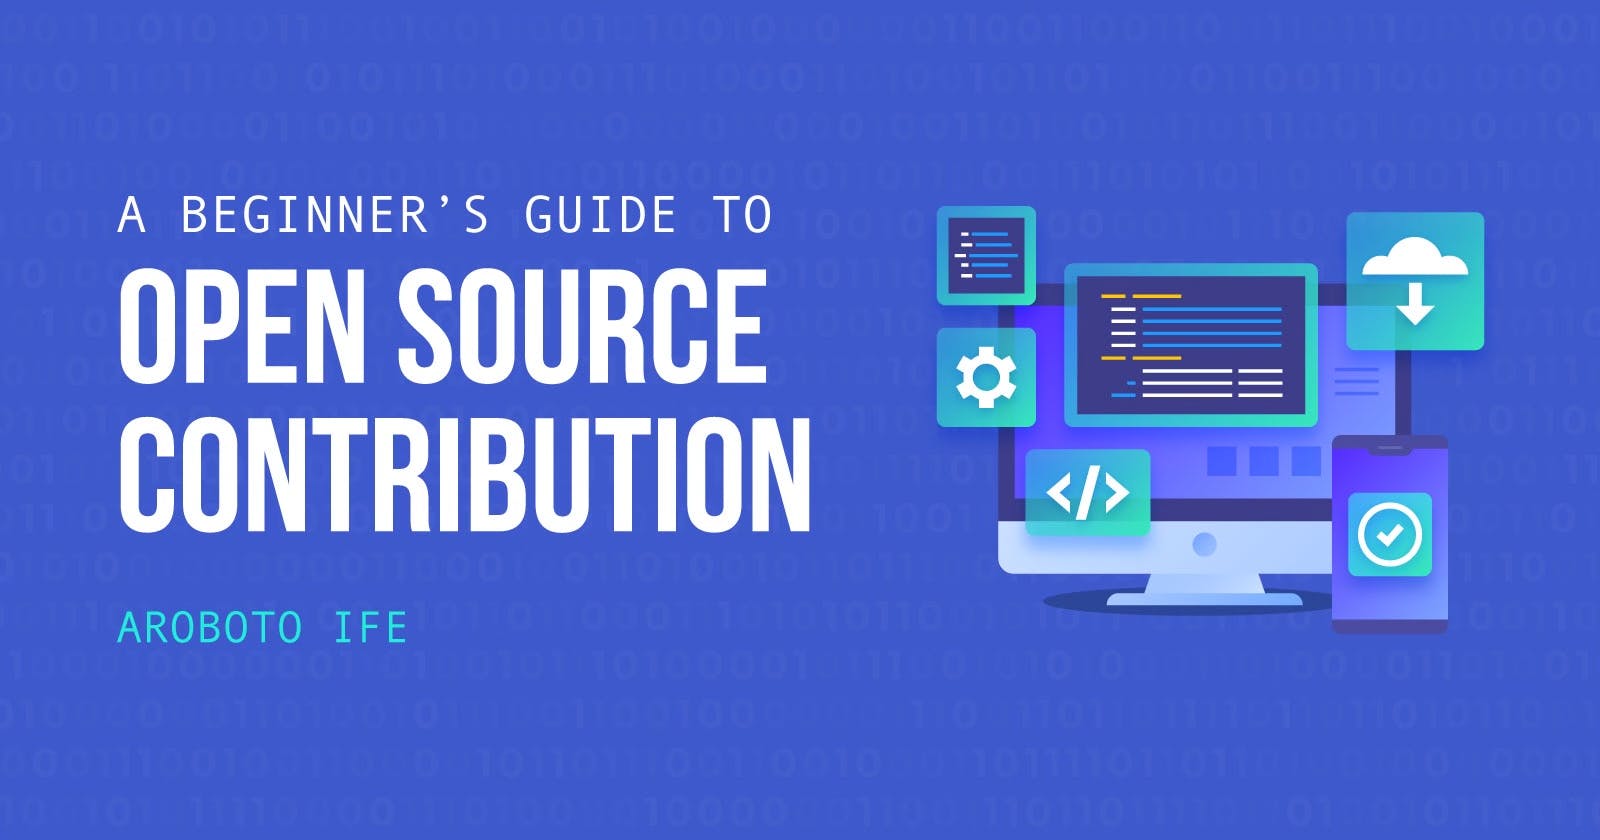 A Beginner's Guide To Open Source Contribution